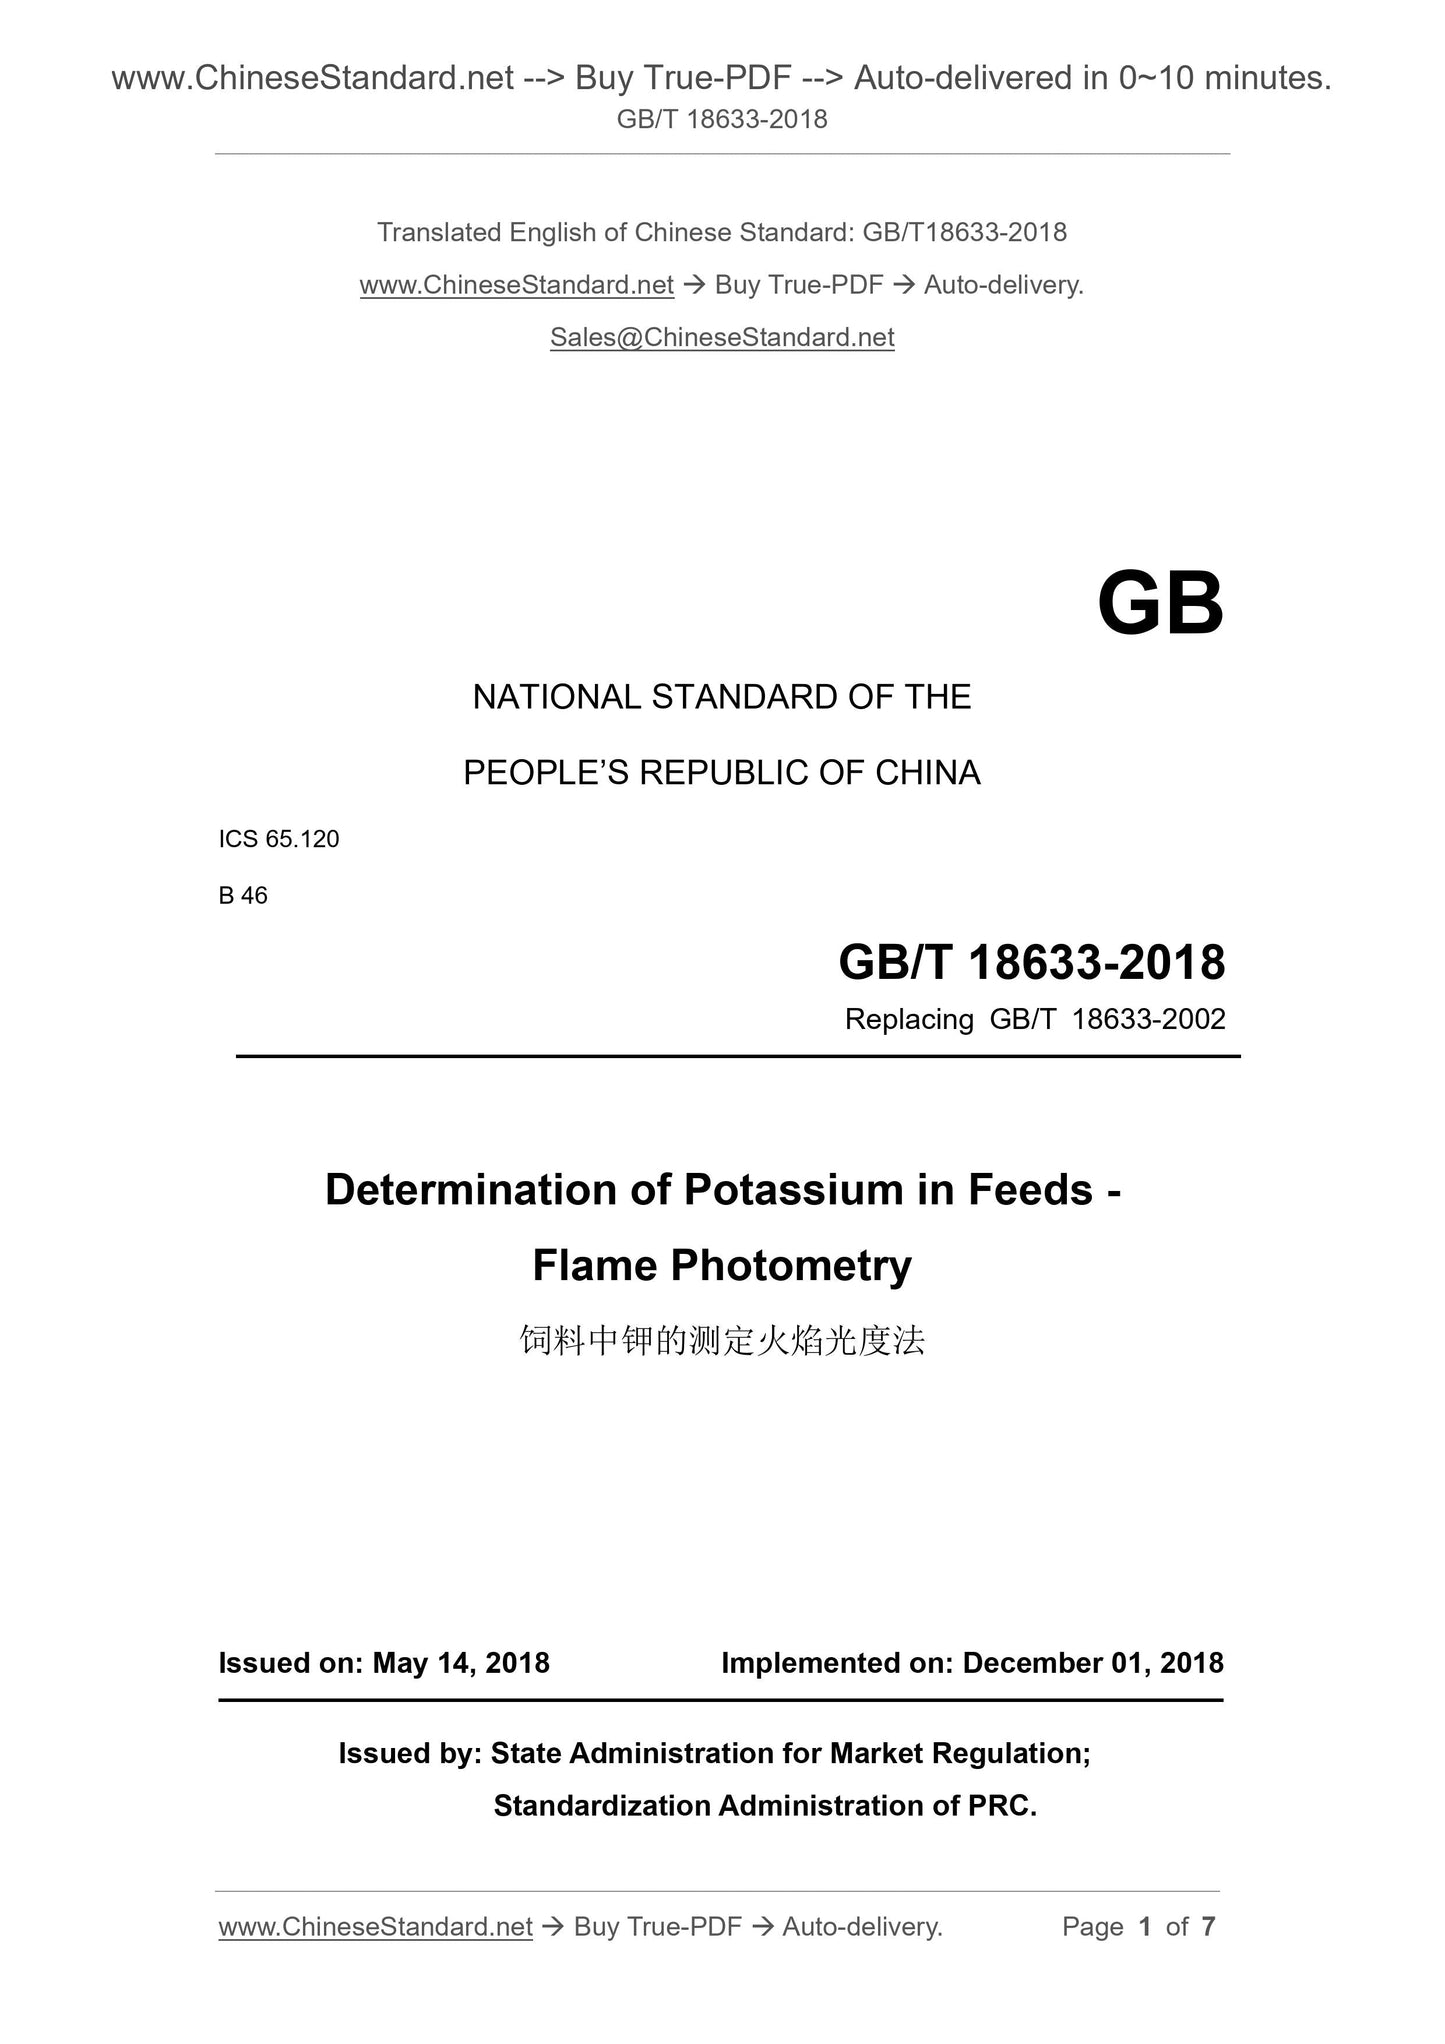 GB/T 18633-2018 Page 1